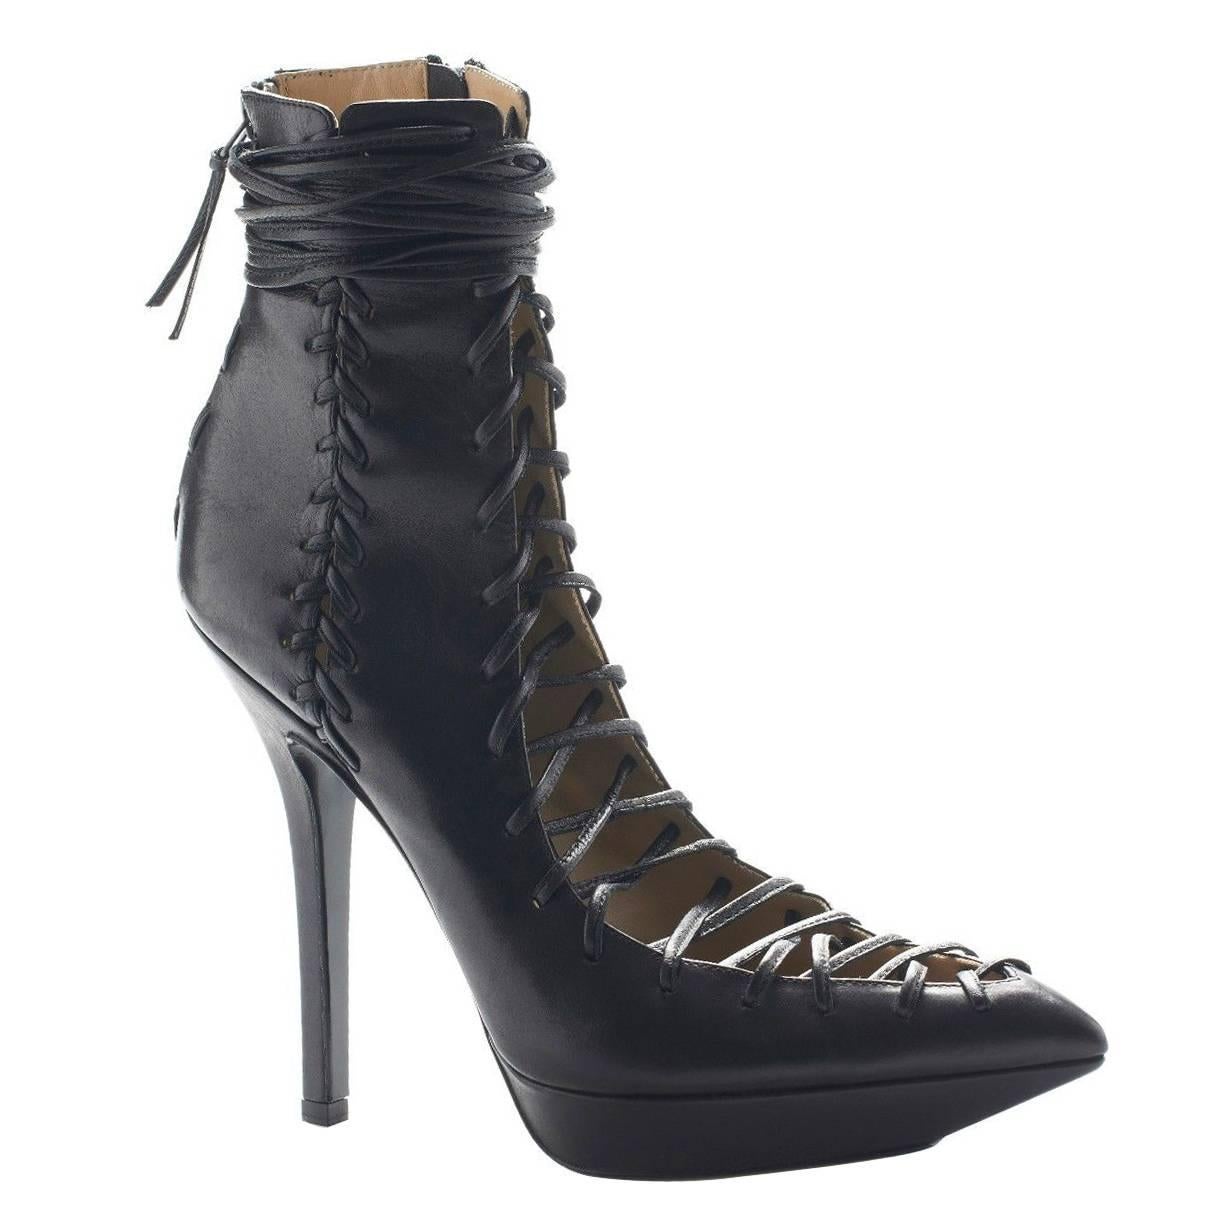 New VERSACE BLACK LEATHER LACE UP BOOTS